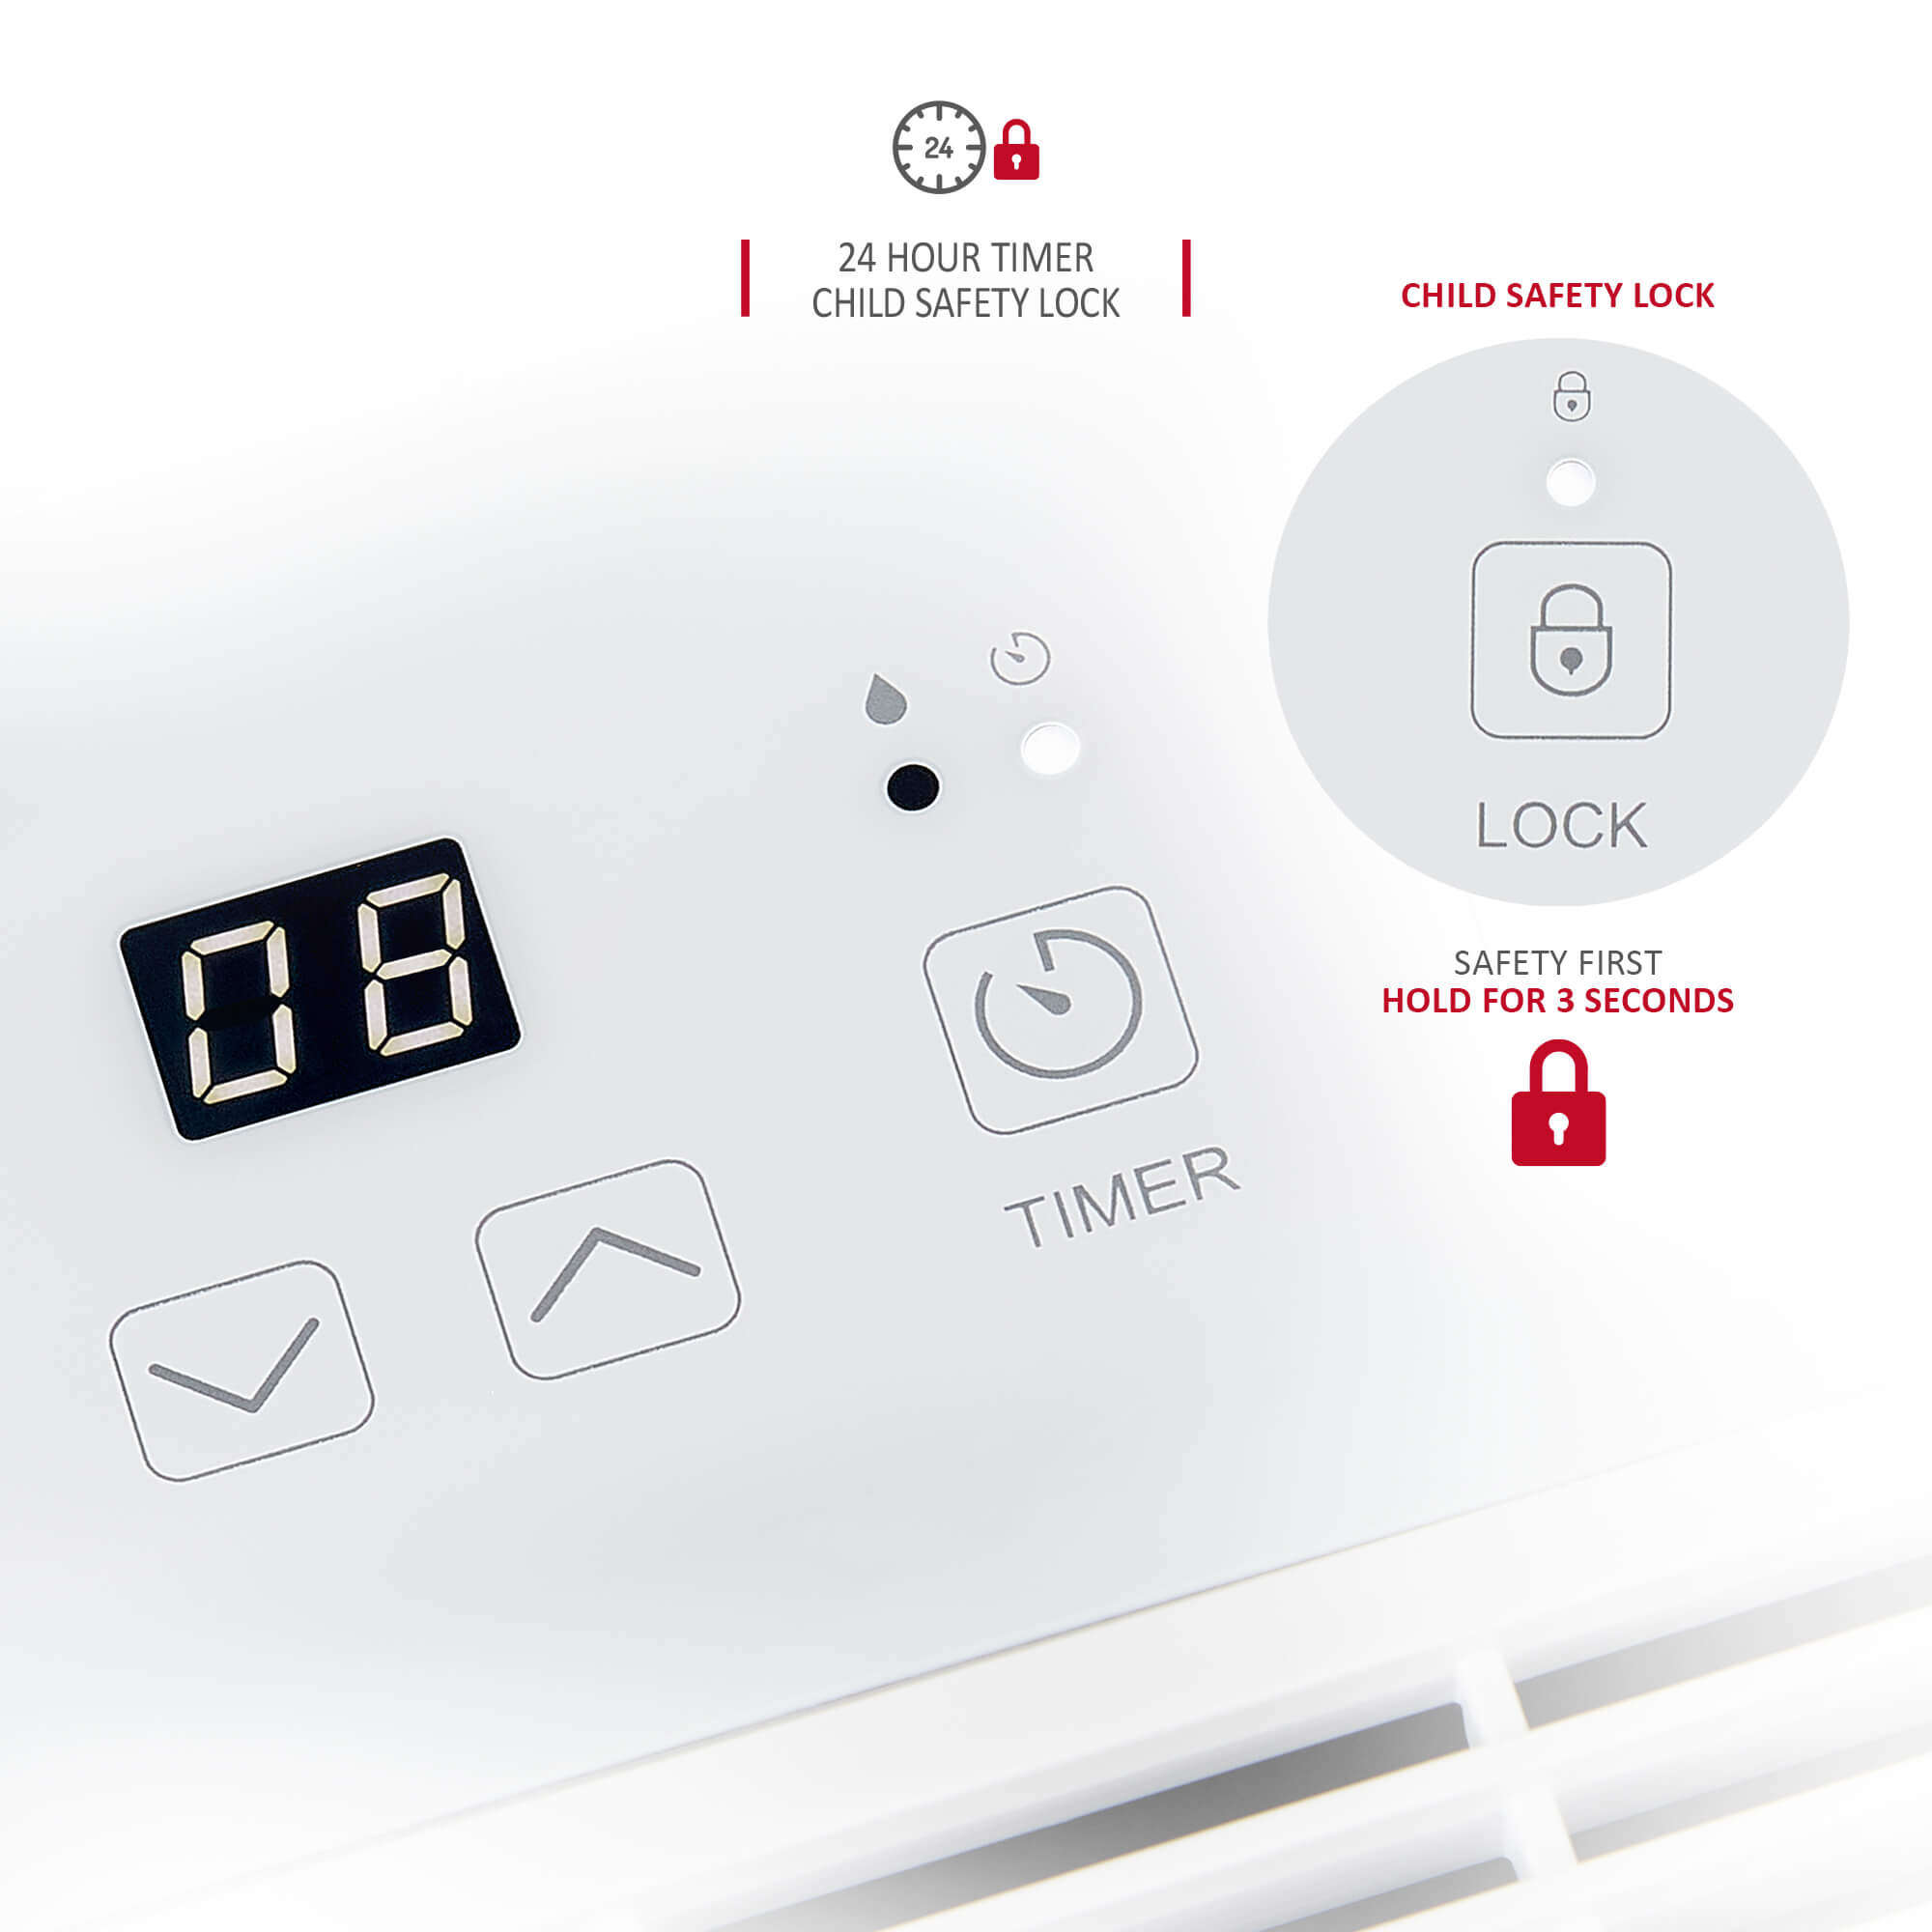 NETTA 25L Low Energy Dehumidifier Continuous Drainage Timer - Ideal for Damp, Condensation and Laundry Drying